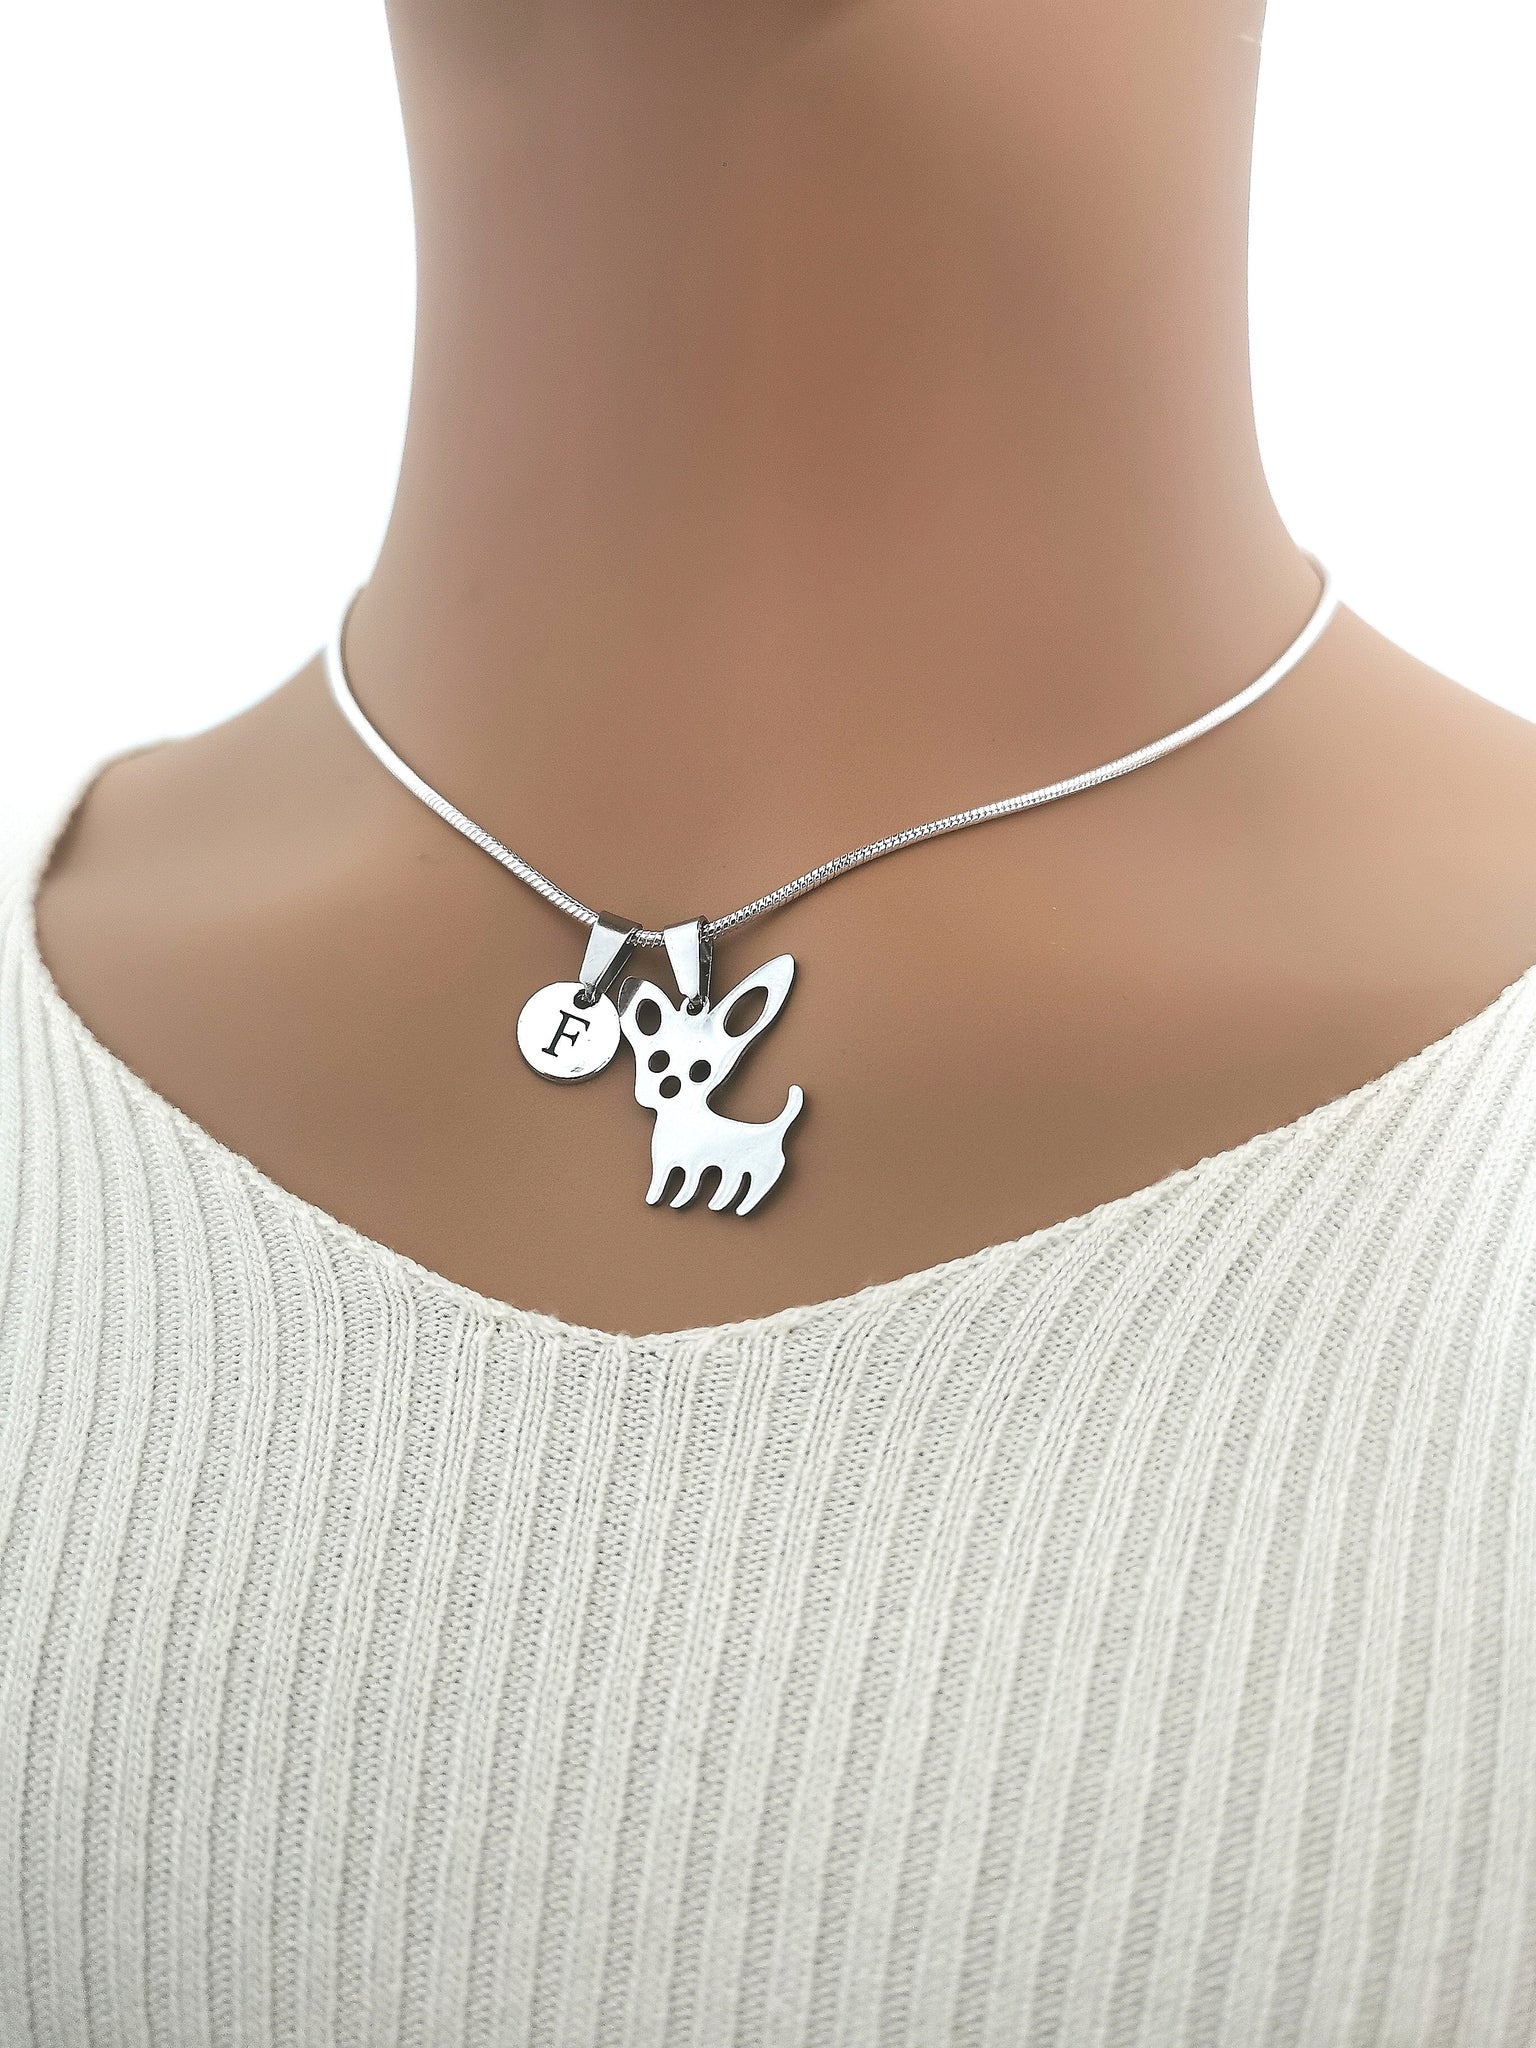 Charming Silver Chihuahua Necklace - Stylish Dog Charm Gift with 18" length - Perfect for Chihuahua enthusiasts - YouLoveYouShop.